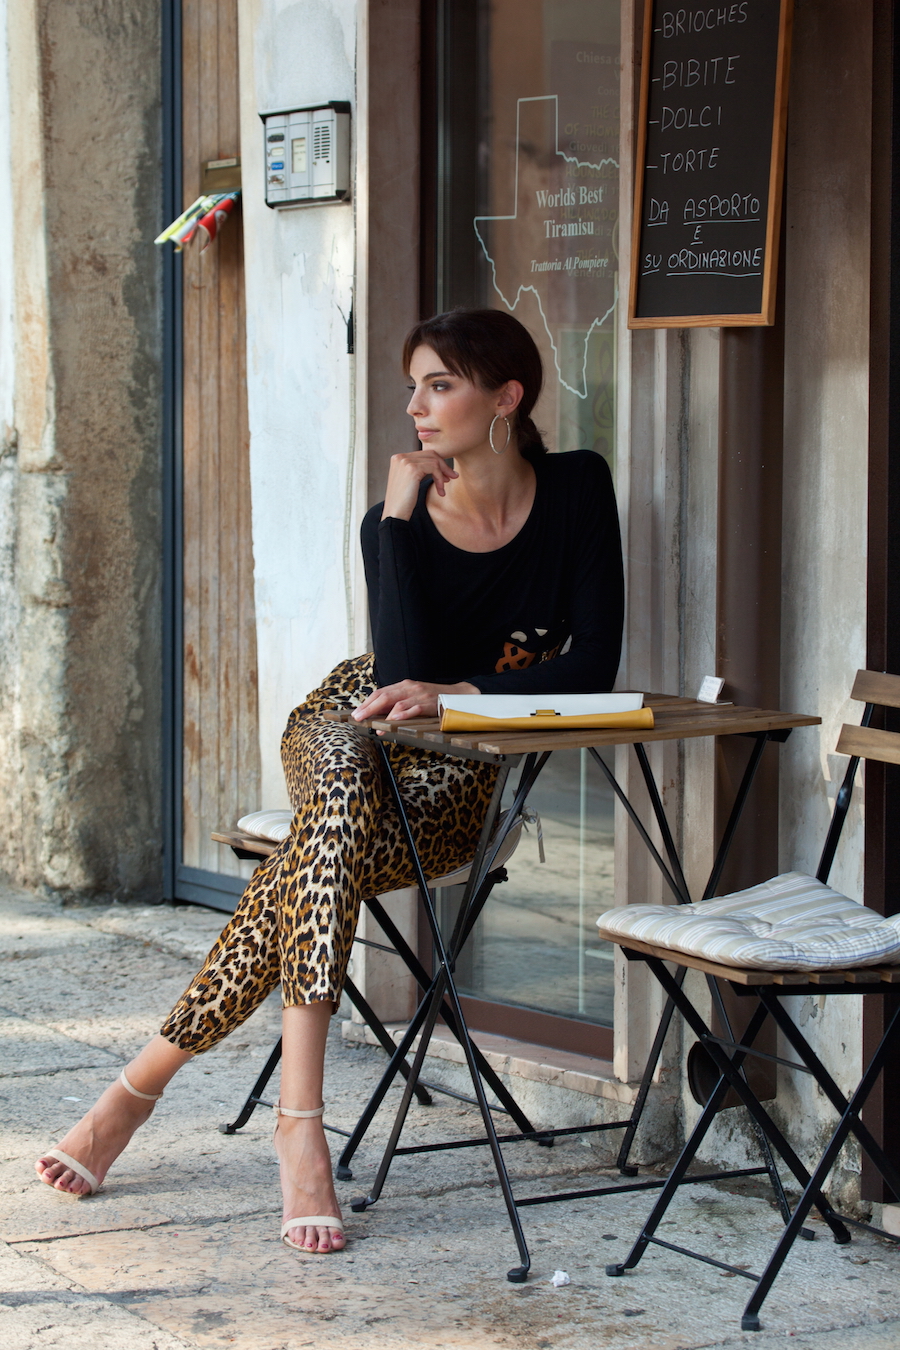 The bold simplicity of Kaj's Tribu Sauvage resort collection was captured during a 2015 Global Runway promotional photo-shoot on location in Verona, Italy. Featured are Kaj’s magyar tee with tribal pocket accents and its classic trousers with pocket accents. Photo courtesy Global Runway.